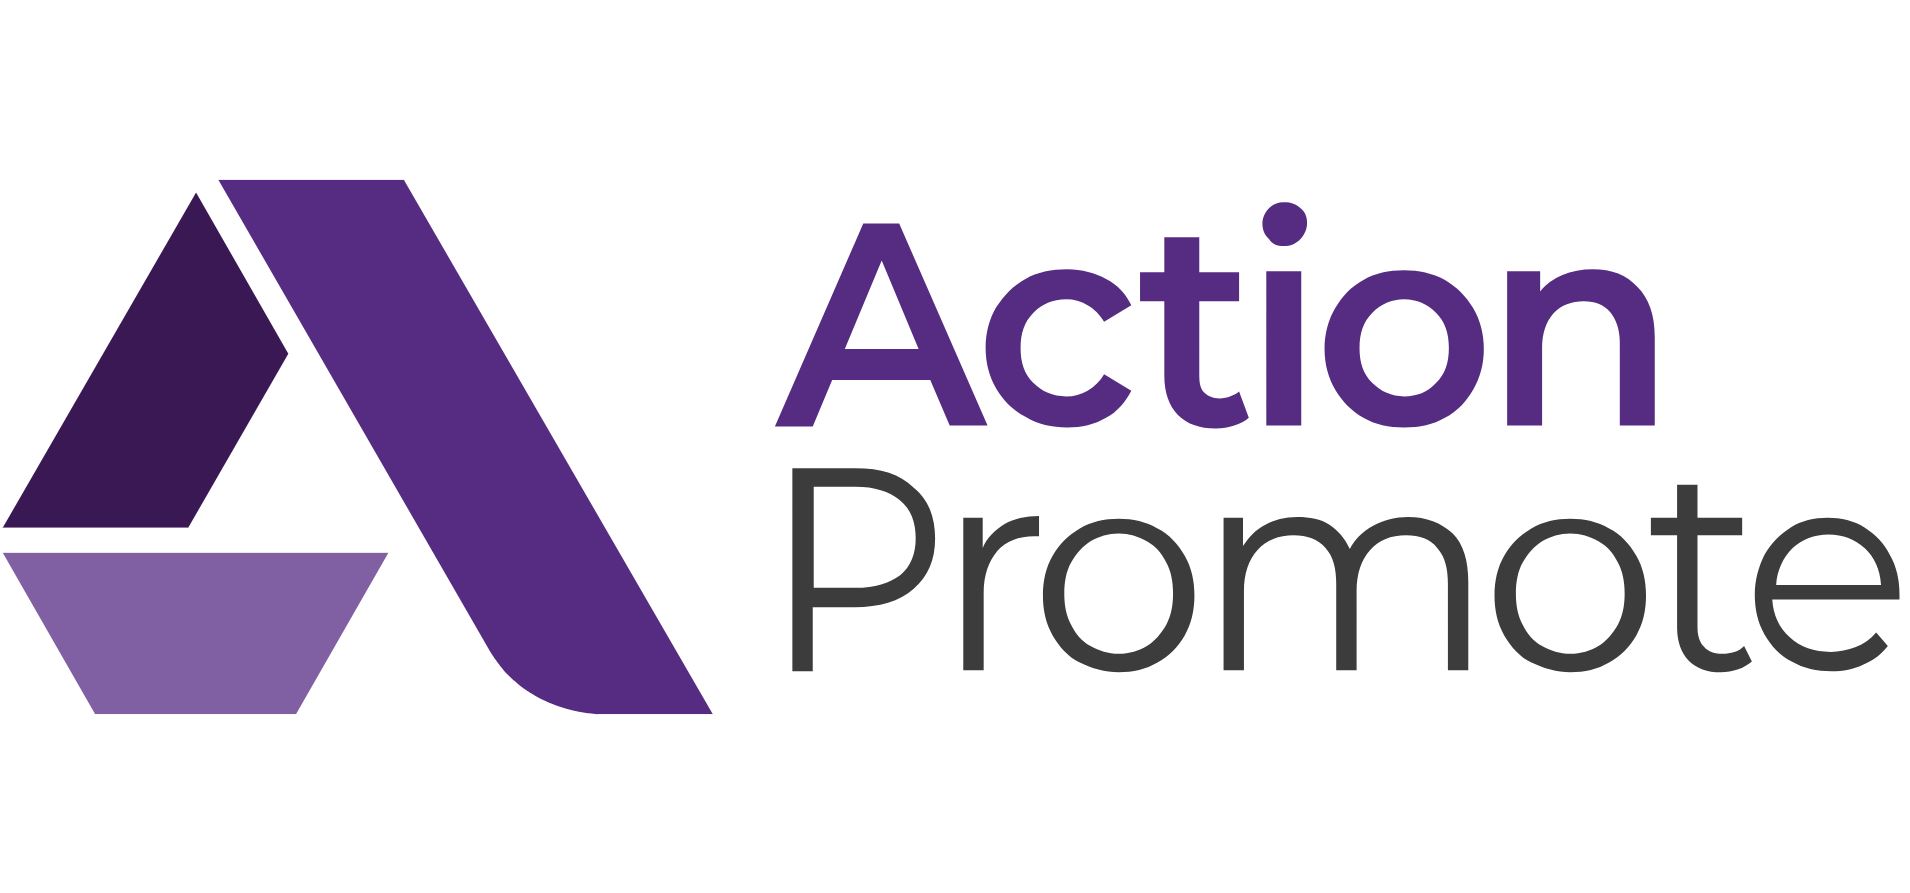 Action Promote